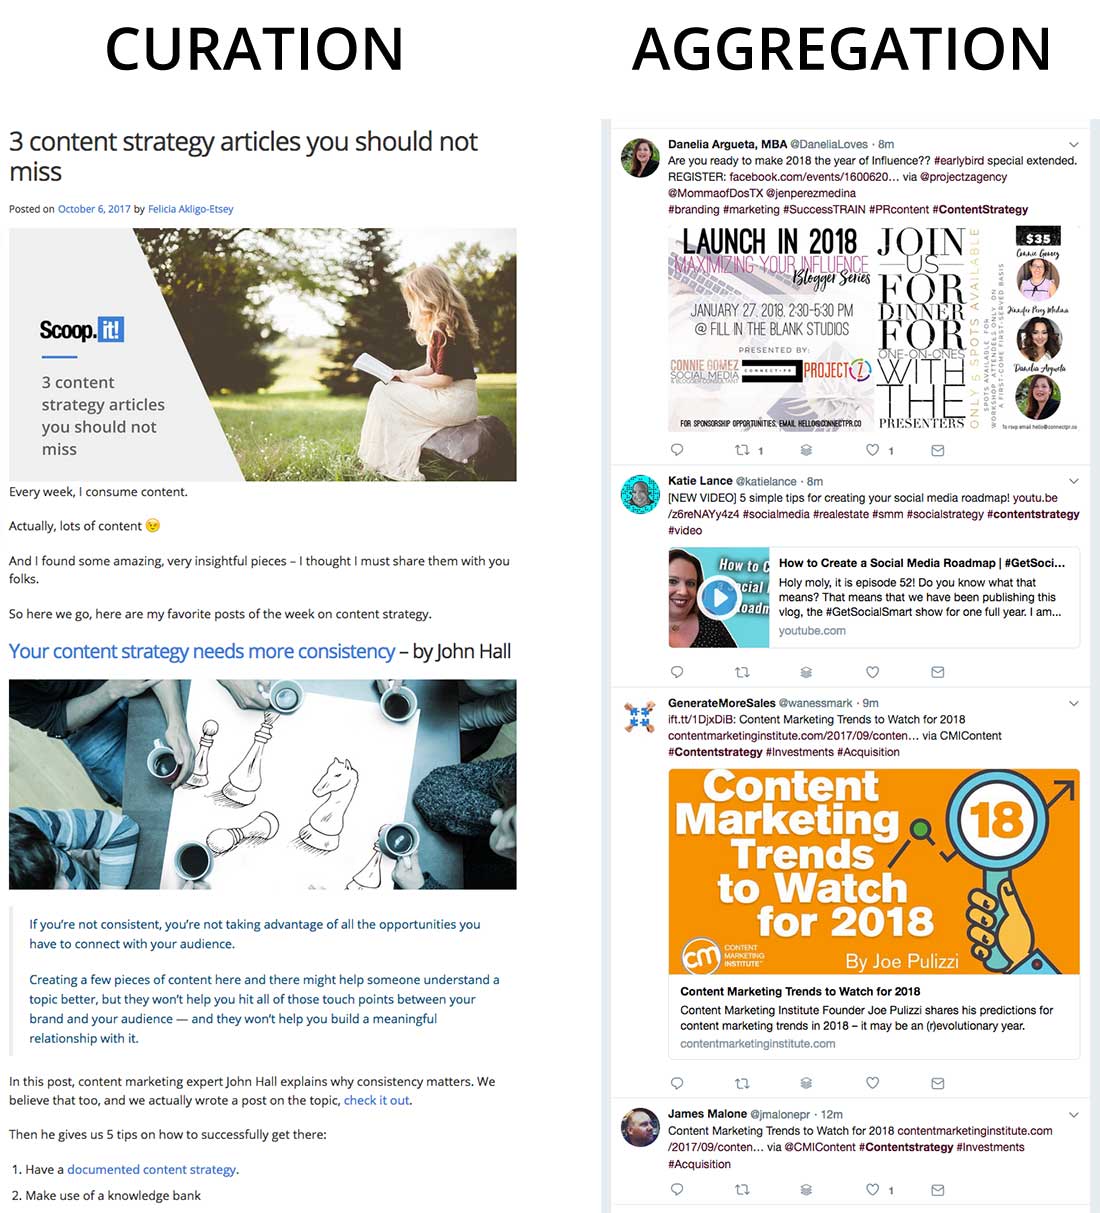 mistaking aggregation for curation is a common content curation mistake